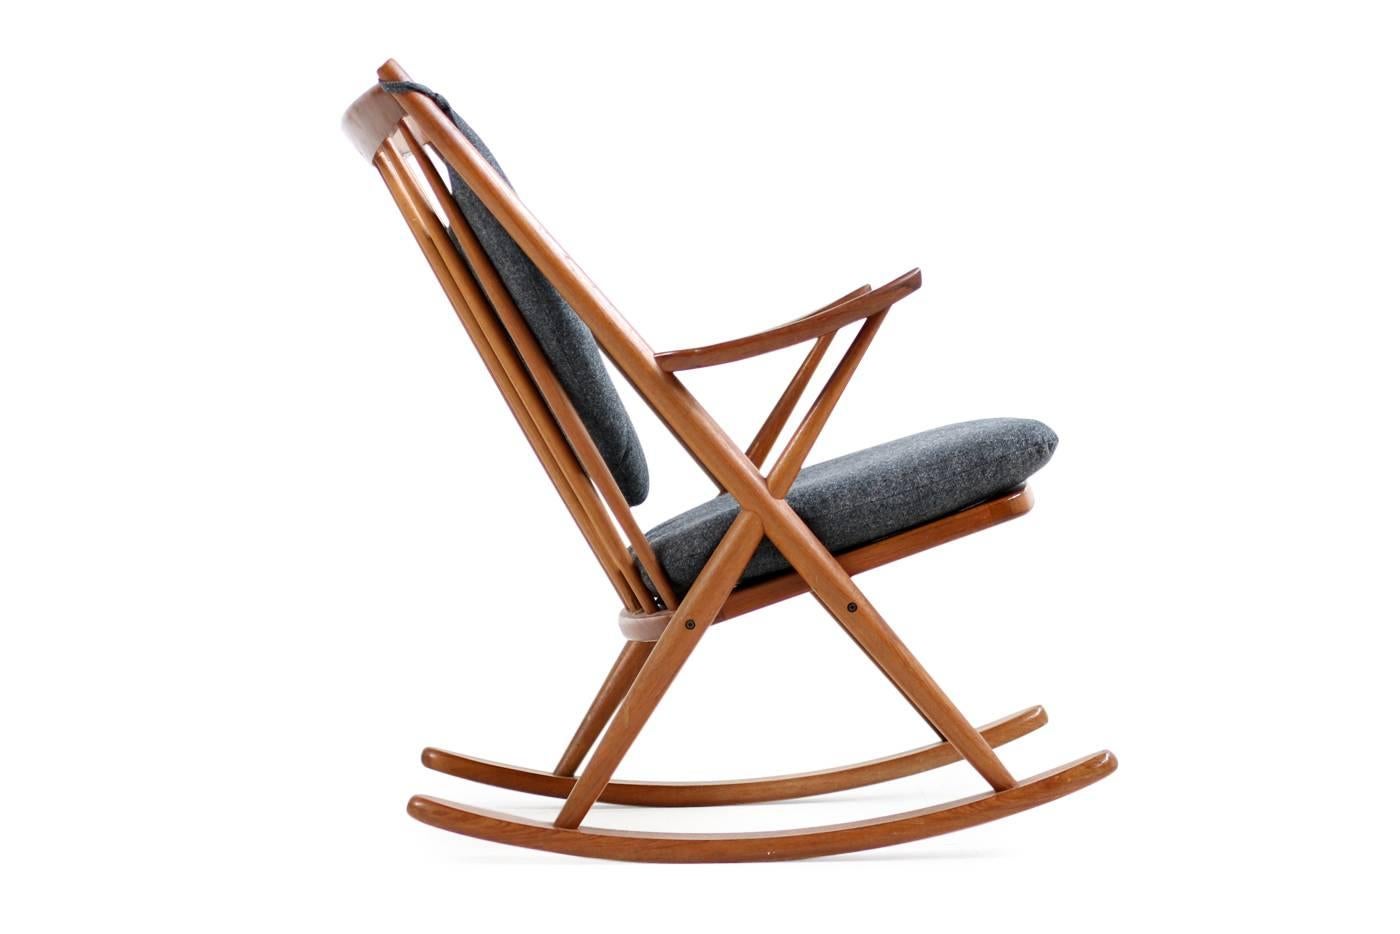 Beautiful 1960s Danish modern rocking chair, solid teak and renewed upholstery in grey wool. Very good condition. Made in Denmark by Bramin, designed by Frank Reenskaug, model 182.